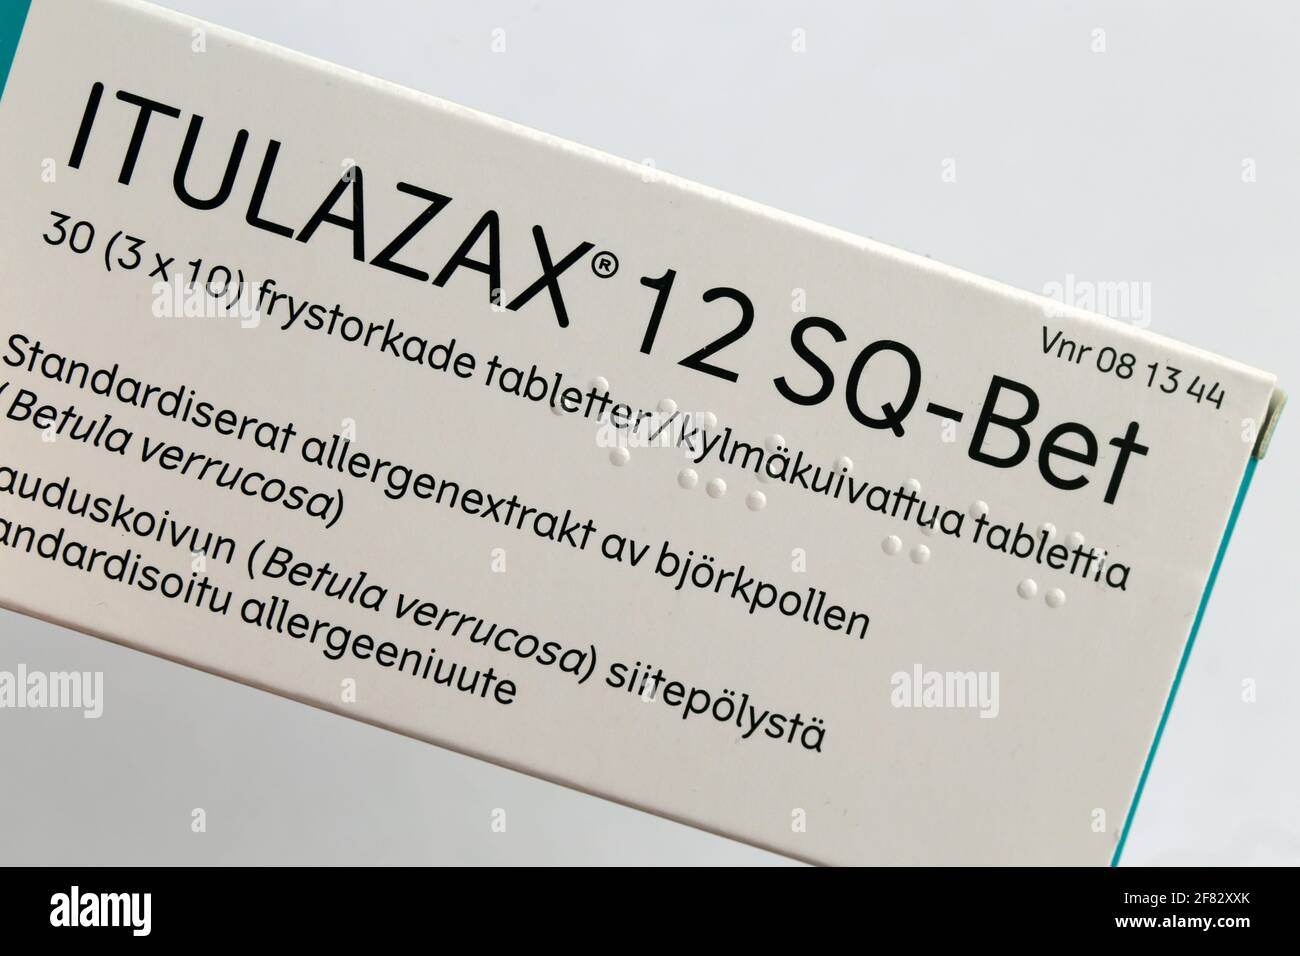 Itulazax tree sublingual allergy immunotherapy (SLIT) tablets used to desensitization of birch and tree pollen allergies. Apr 2020, Espoo, Finland. Stock Photo